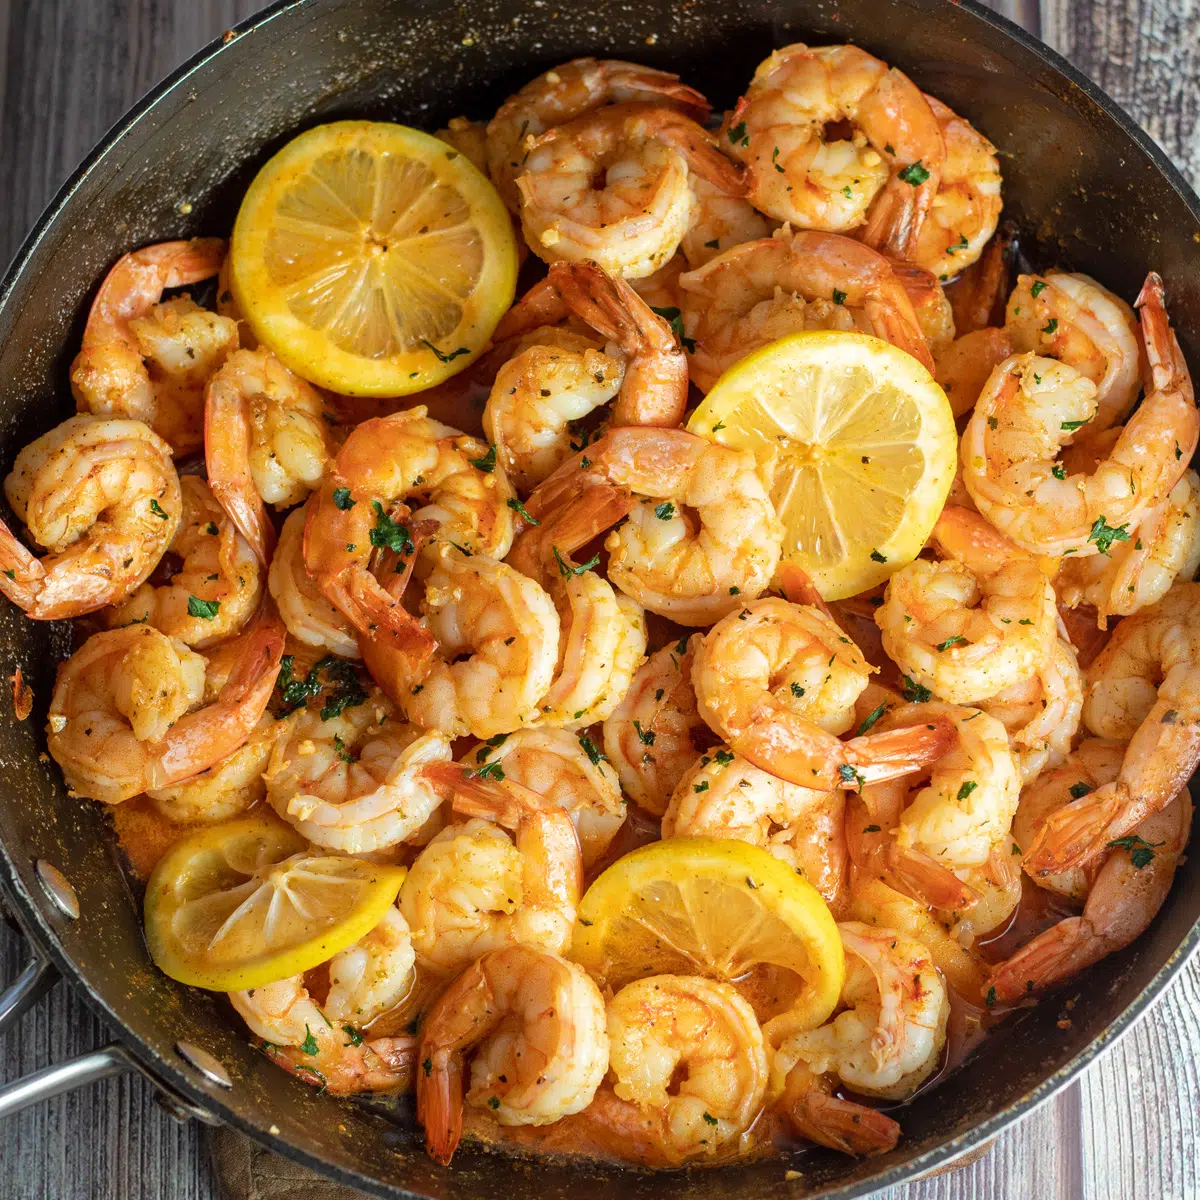 Square image of cajun shrimp with lemon slices in a frying pan.